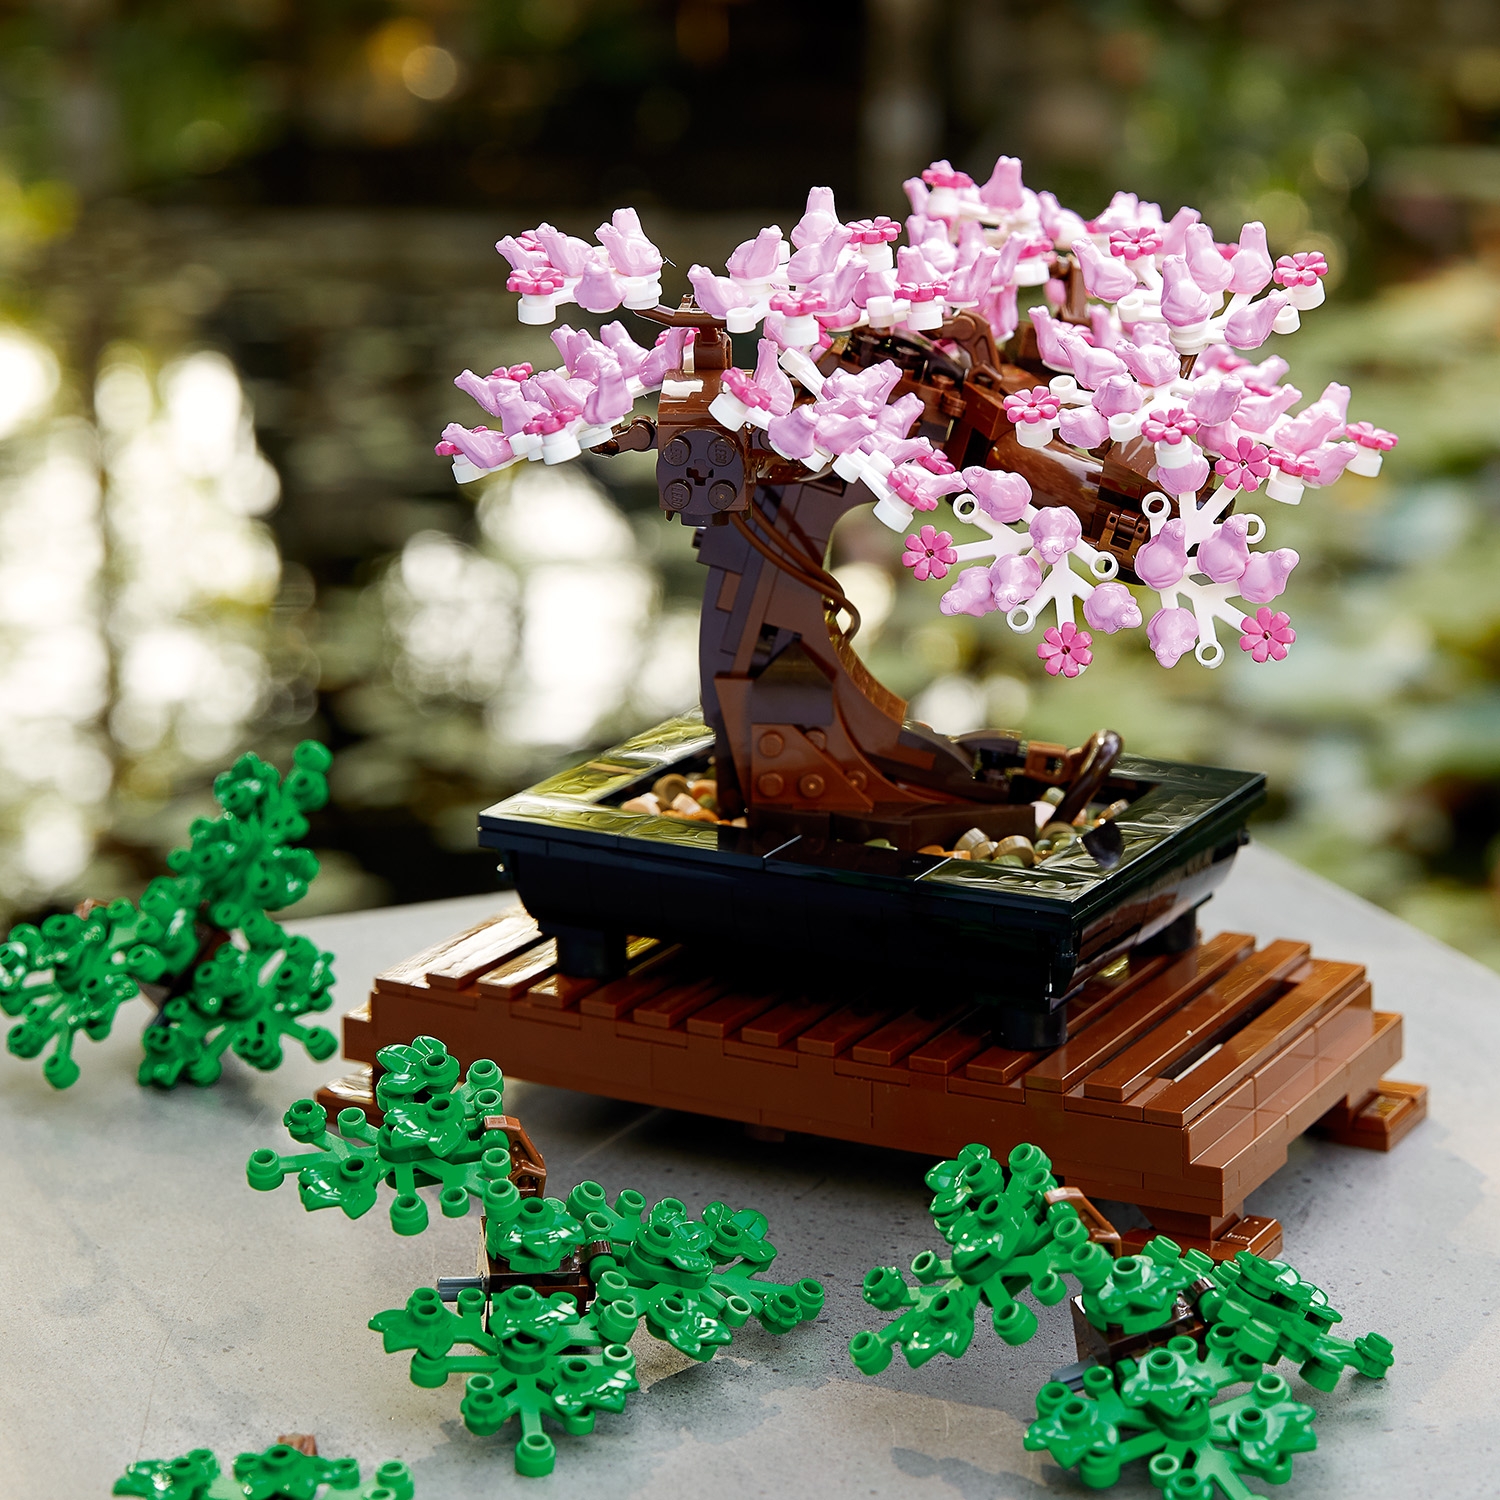 LEGO opened a pop-up Botanical Cafe in Taiwan showcasing the Botanical  Collection amidst real flowers - Jay's Brick Blog